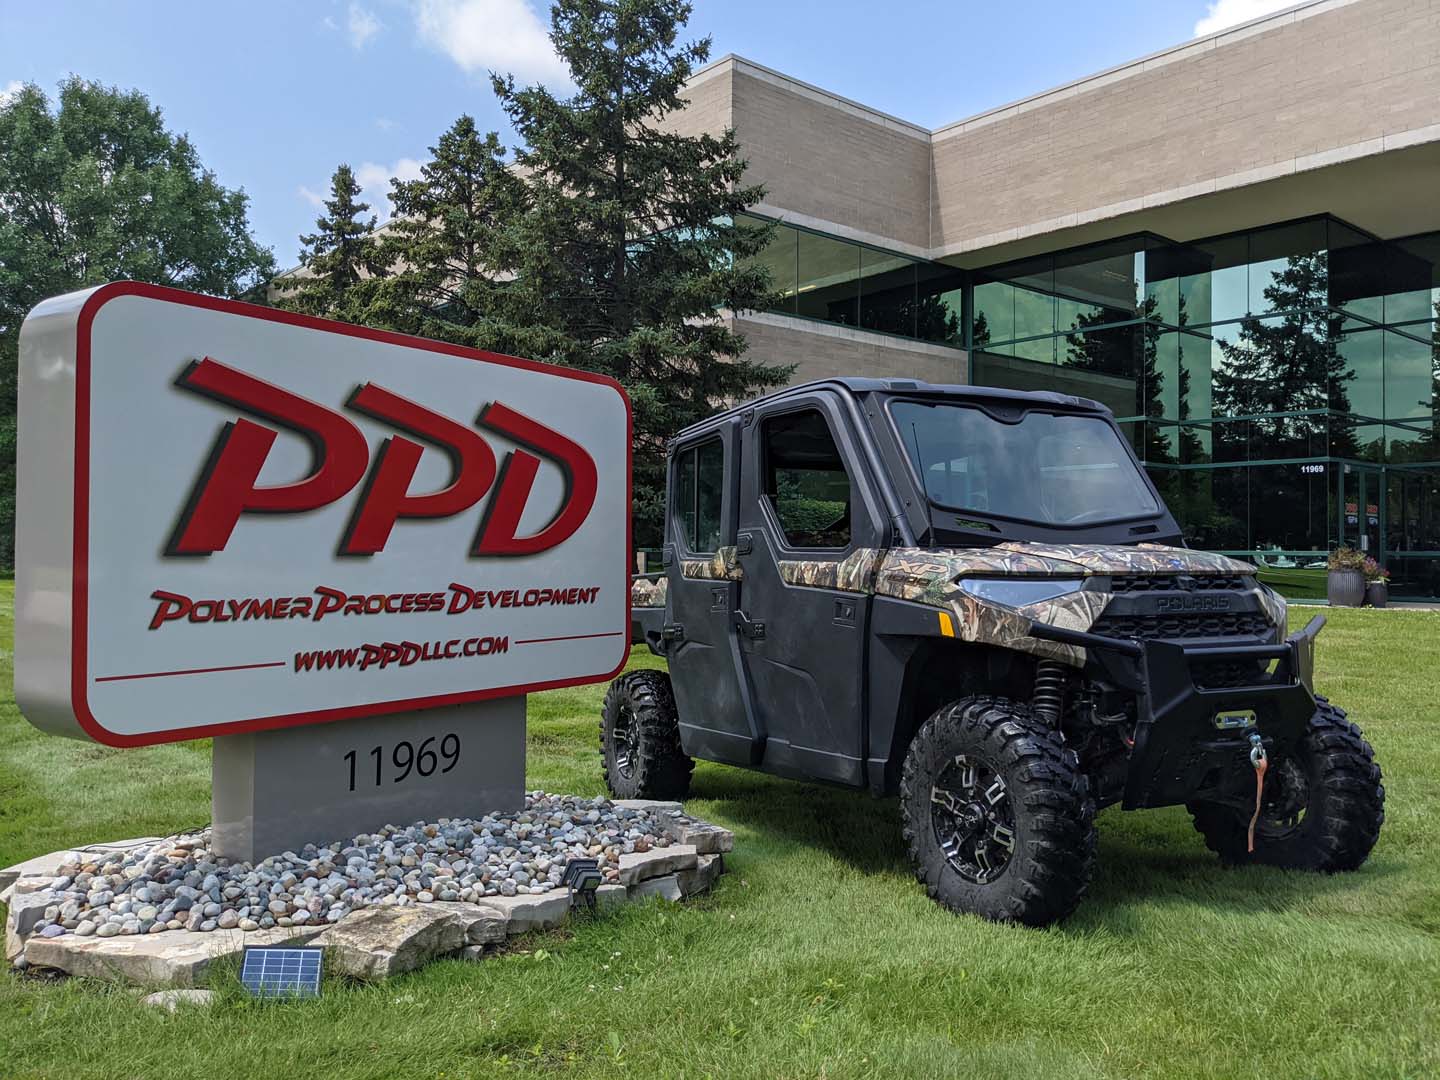 PPD - Exterior